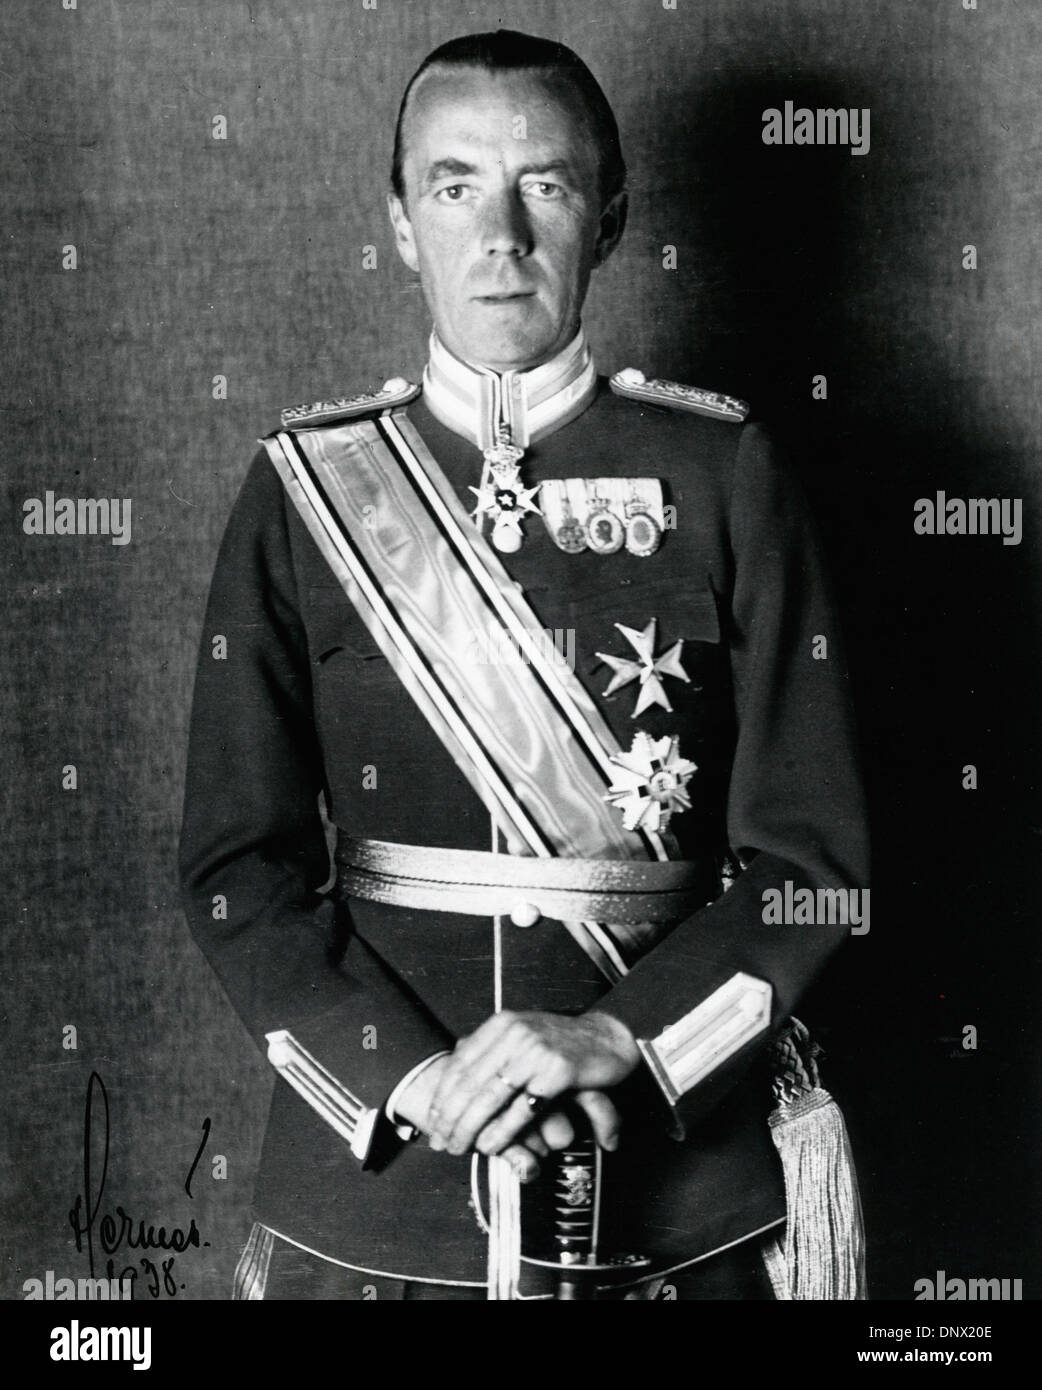 March 6, 1938 - Norway, Sweden - COUNT FOLKE BERNADOTTE the UN Mediator in Palestine and President of the Swedish Red Cross. (Credit Image: © KEYSTONE Pictures USA/ZUMAPRESS.com) Stock Photo